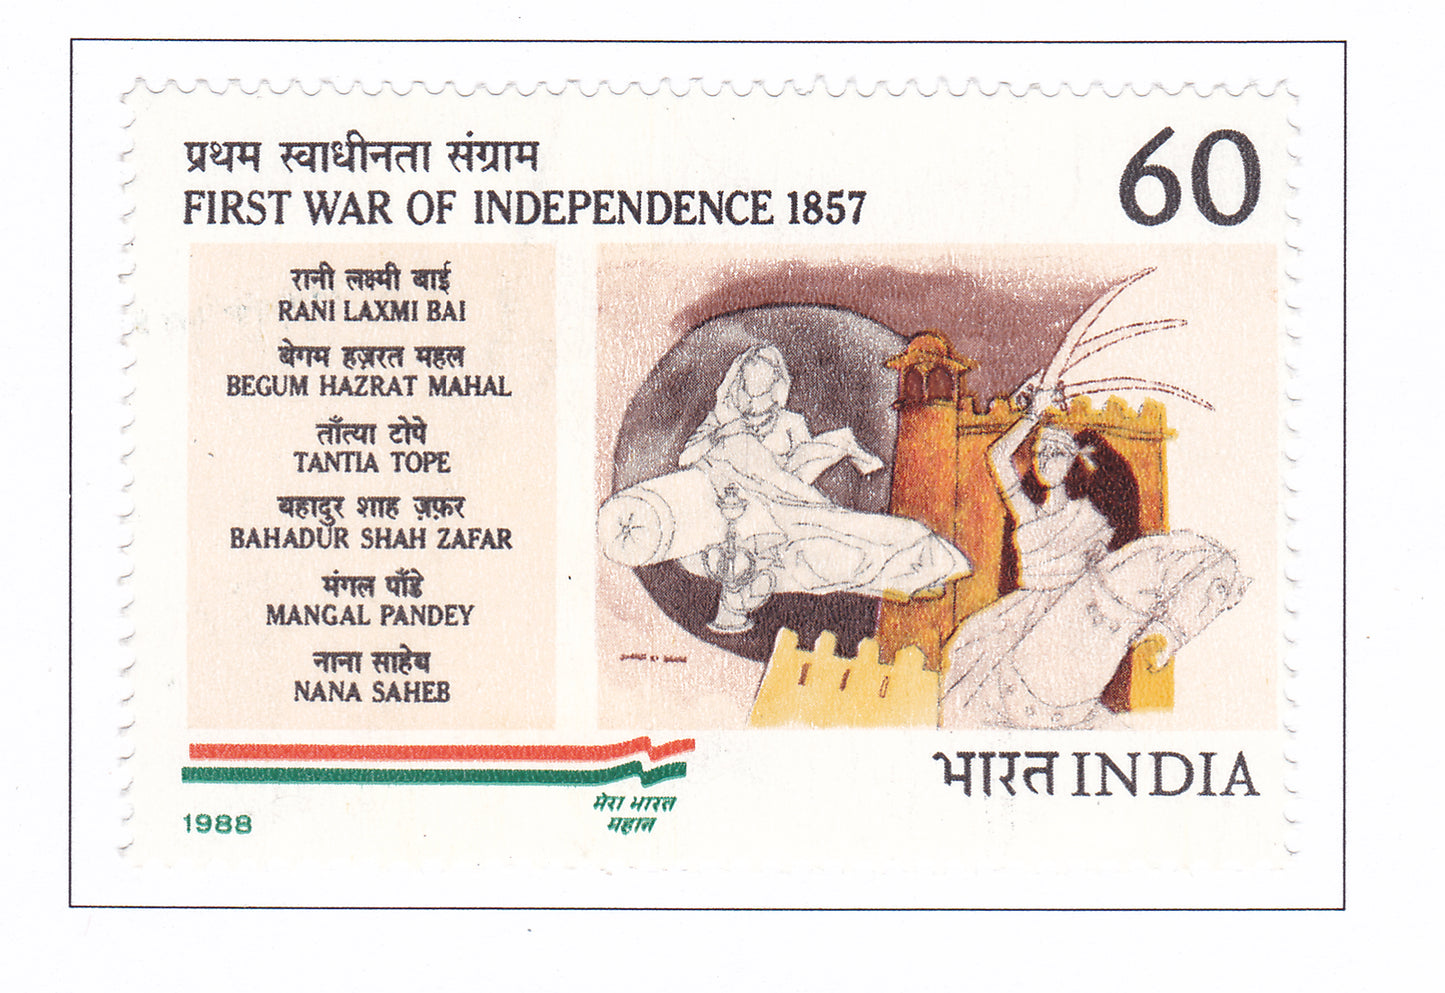 India mint-1988 Martyrs of First War of Independence.